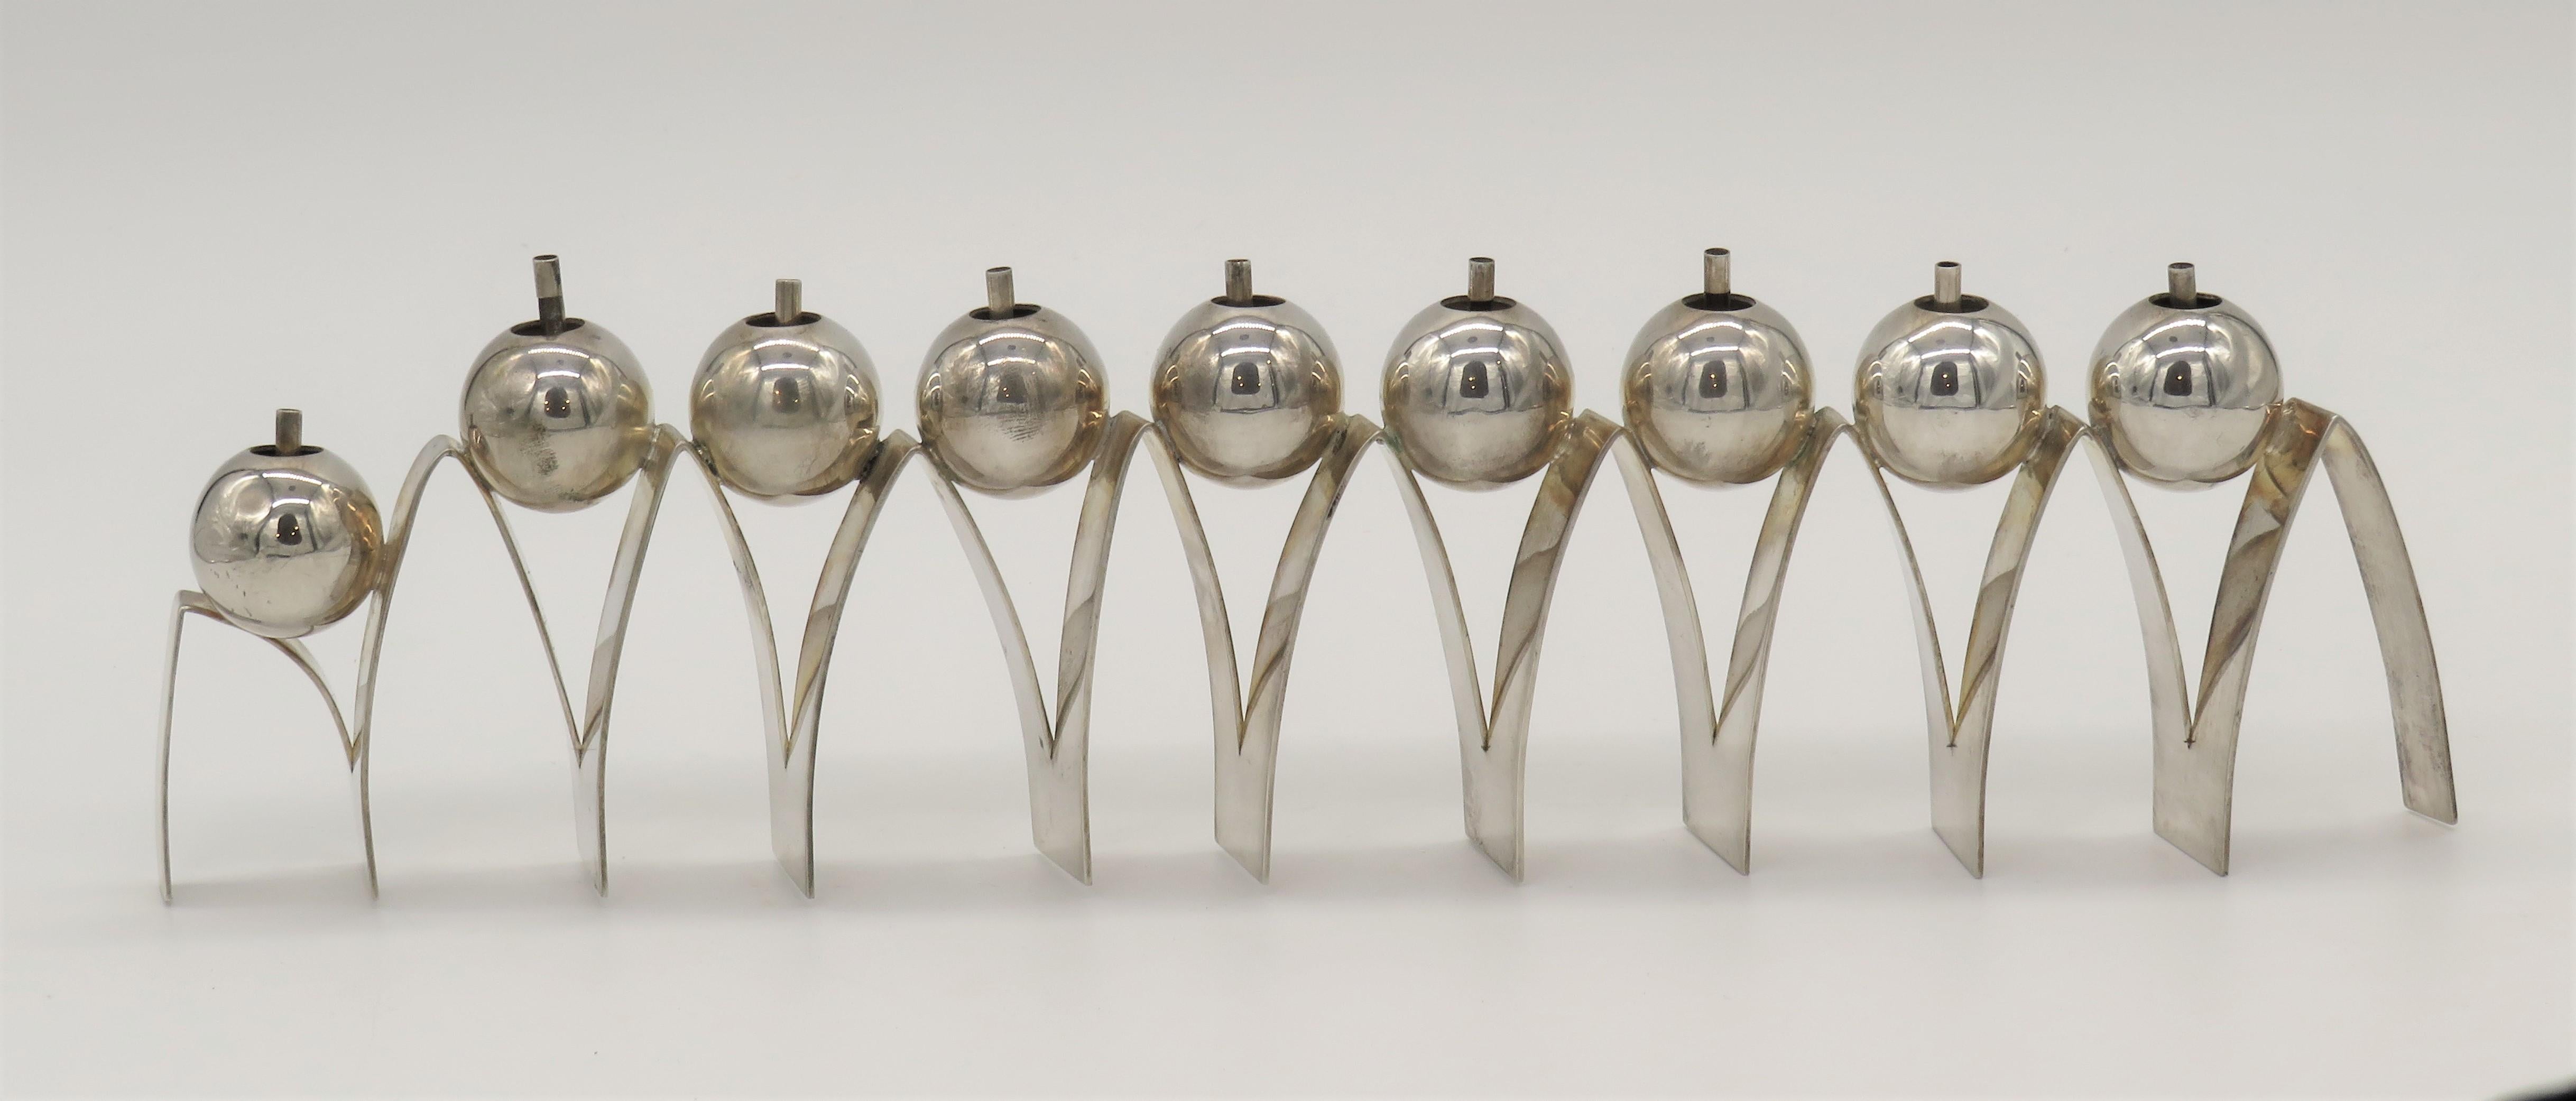 Israeli silver hanukkah lamp by Arie Ofir features nine balls supported by a zig zag base. The stunning silver Hanukkah lamp is for use with oil and candle wicks. Signed and stamped by Arie Ofir with silver hallmarks are seen. 

The Hanukkah lamp